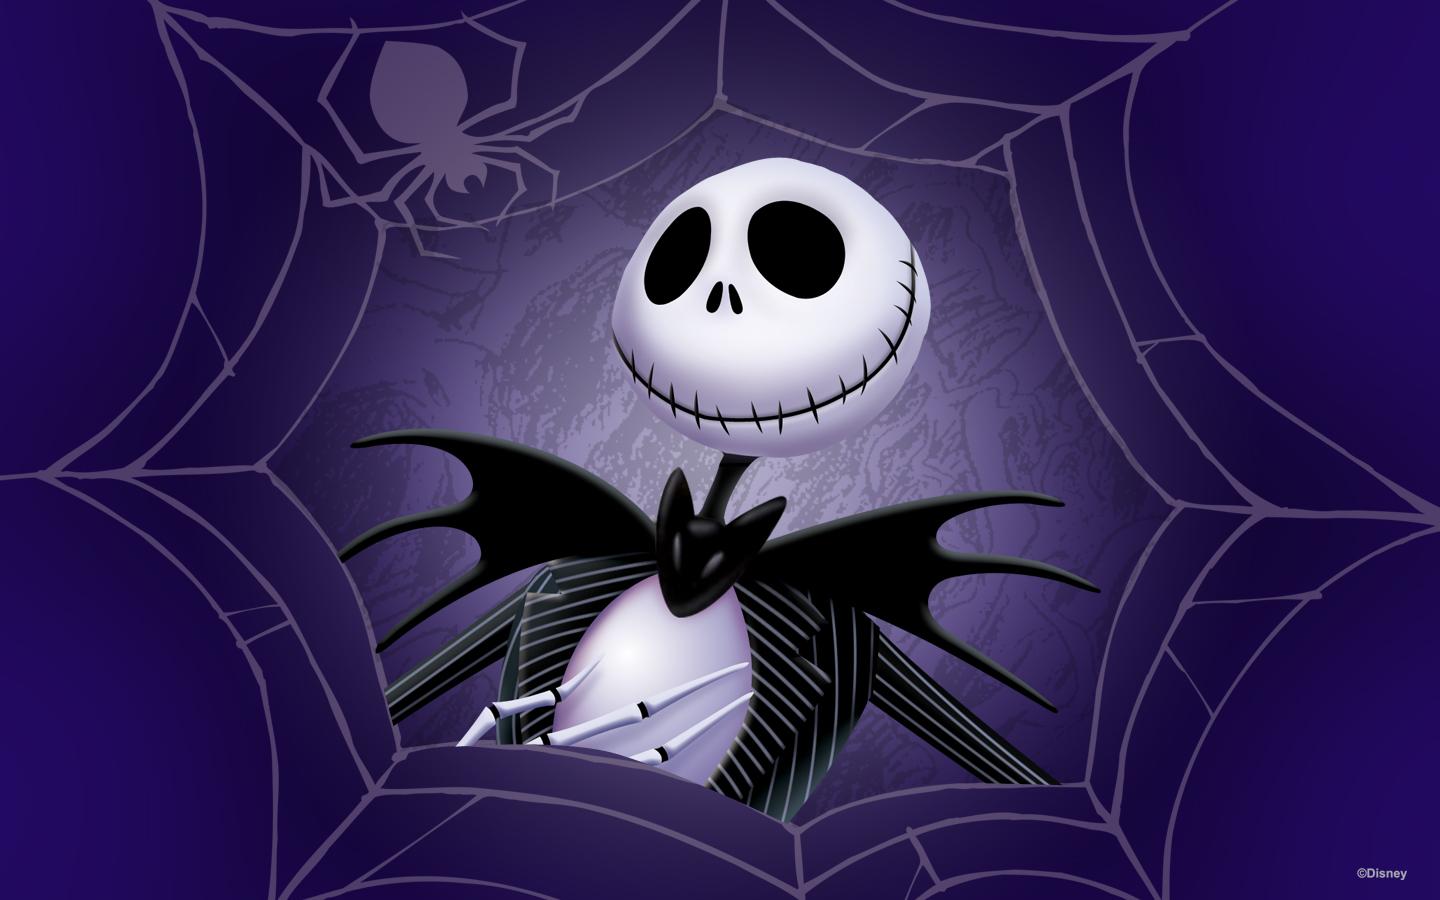 Image About Nightmare Before Christmas